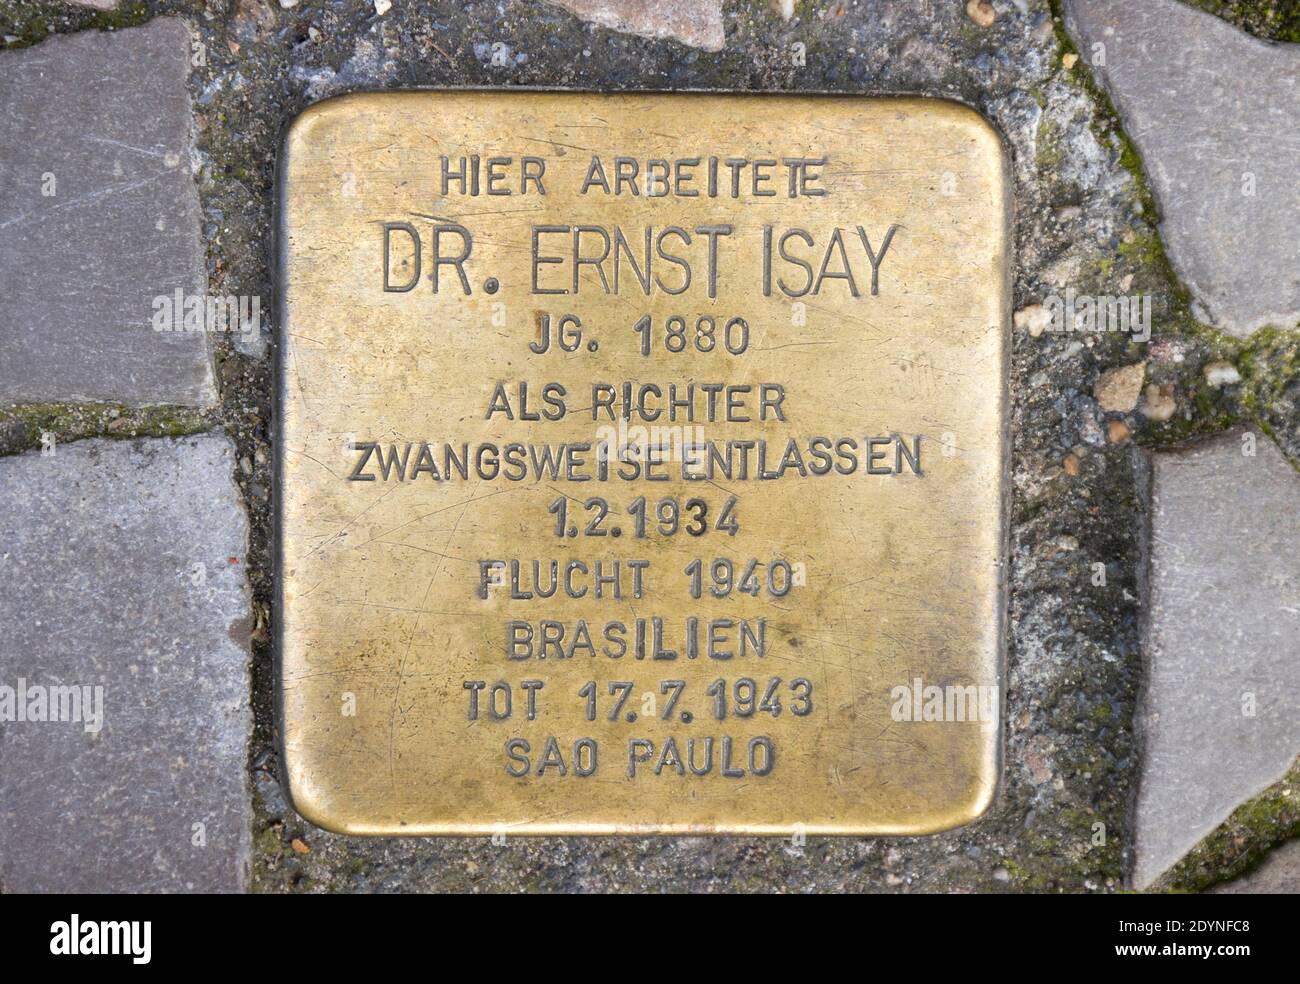 Stolperstein, commemoration for the judge Dr. Ernst Isay in front of the Higher Administrative Court Berlin, Germany Stock Photo